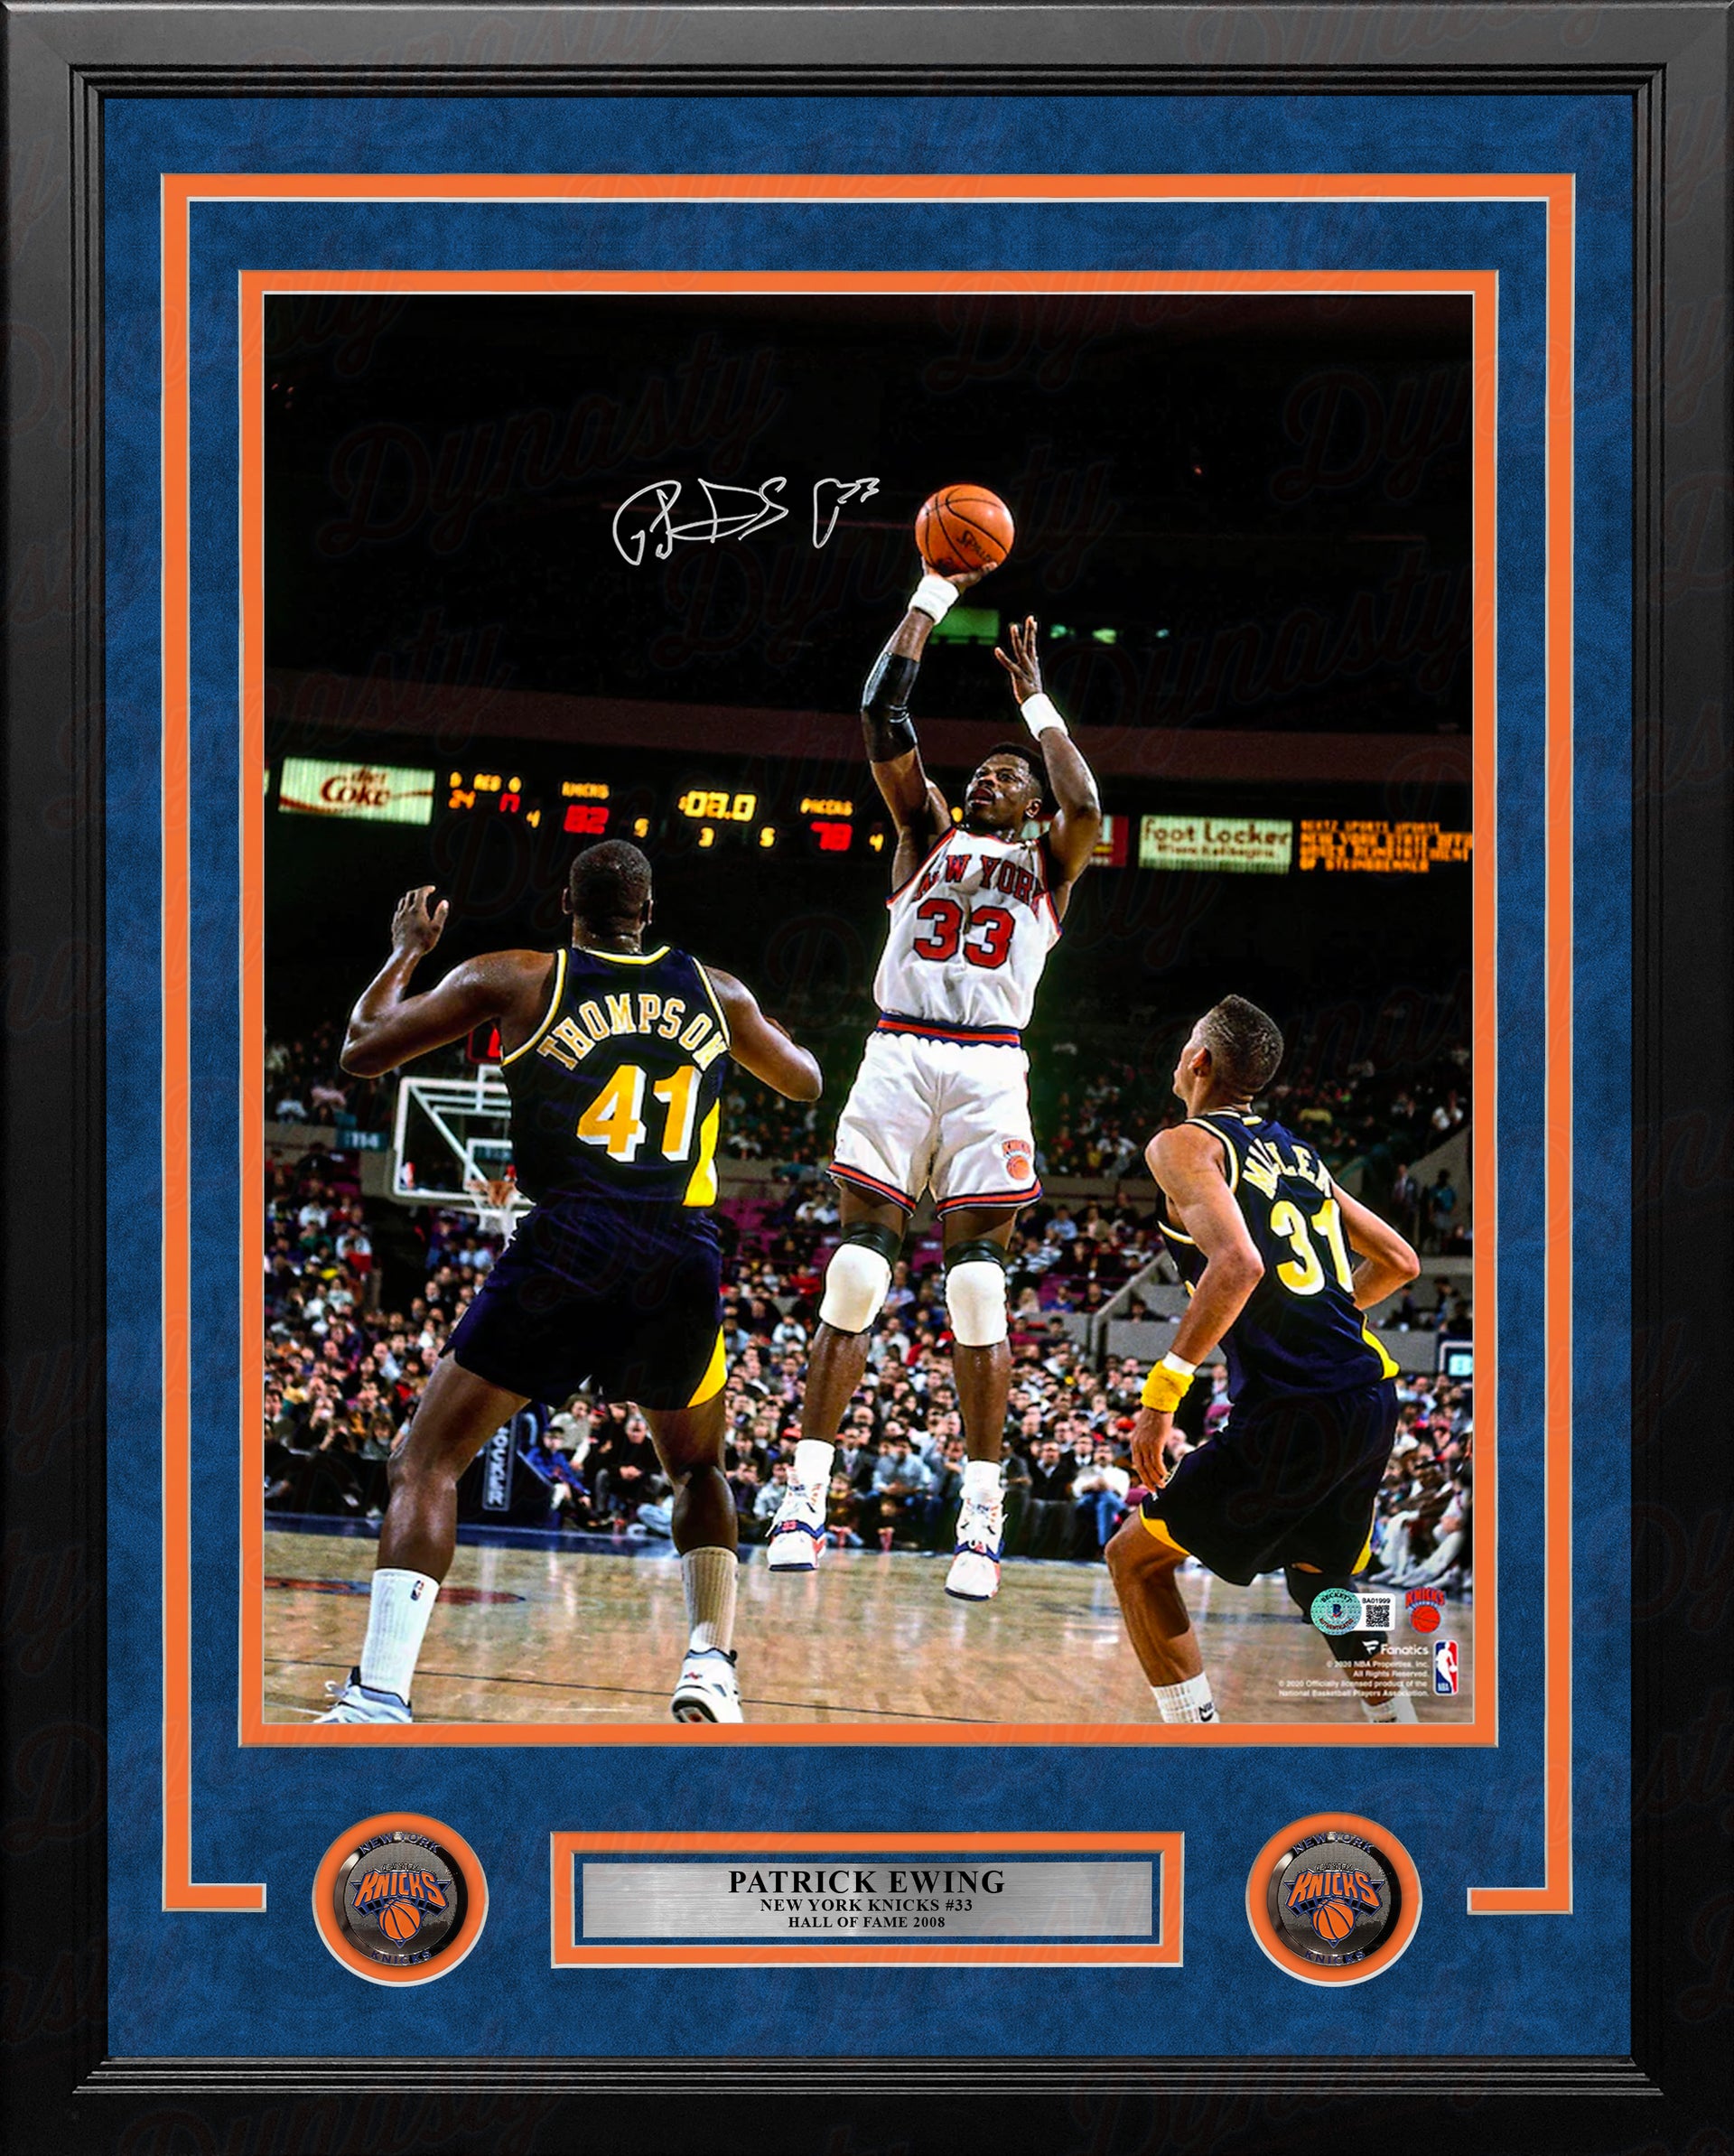 Patrick Ewing Shooting Action New York Knicks Autographed 16" x 20" Framed Basketball Photo - Dynasty Sports & Framing 